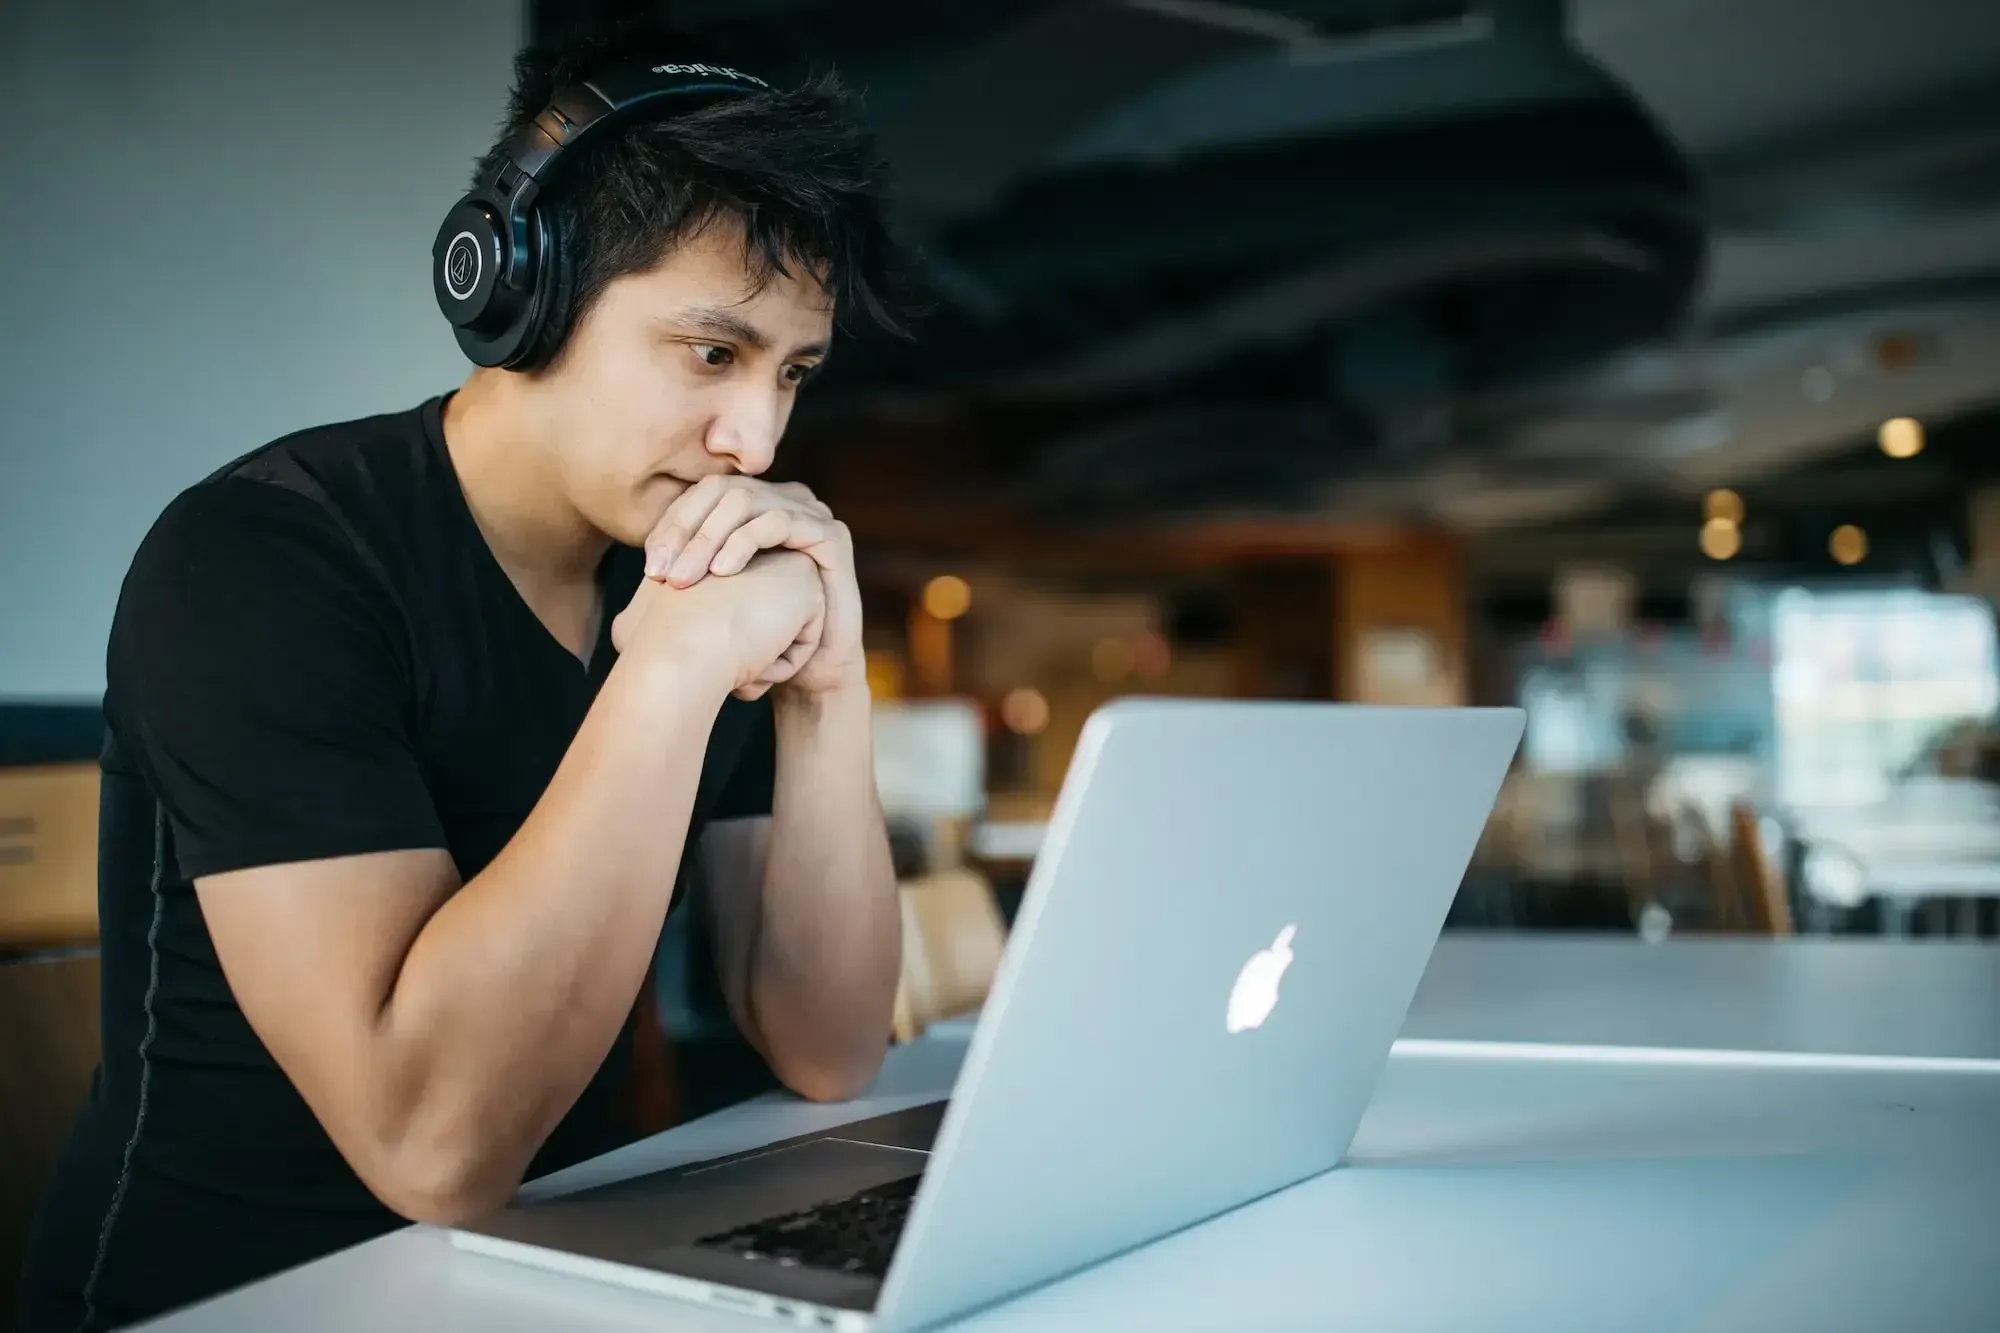 Man with a black shirt wearing headphones, looking at his laptop in front of him, concentrating with his hands on his chin.